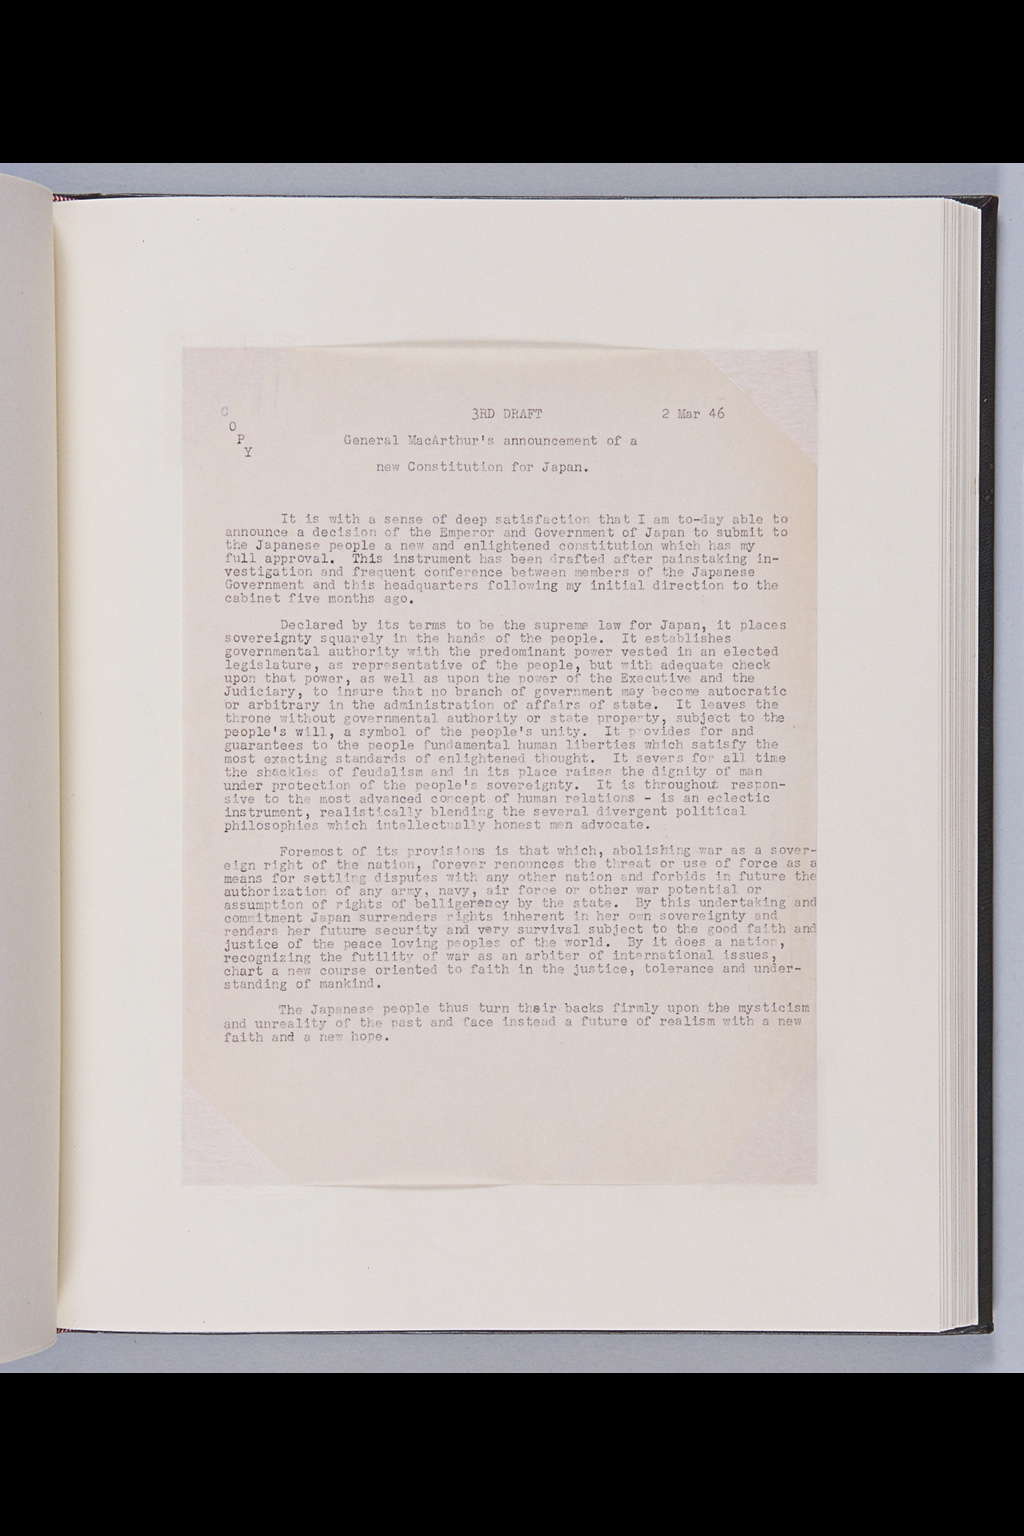 [General MacArthur's announcement of a new Constitution for Japan, 3rd draft](Larger image)